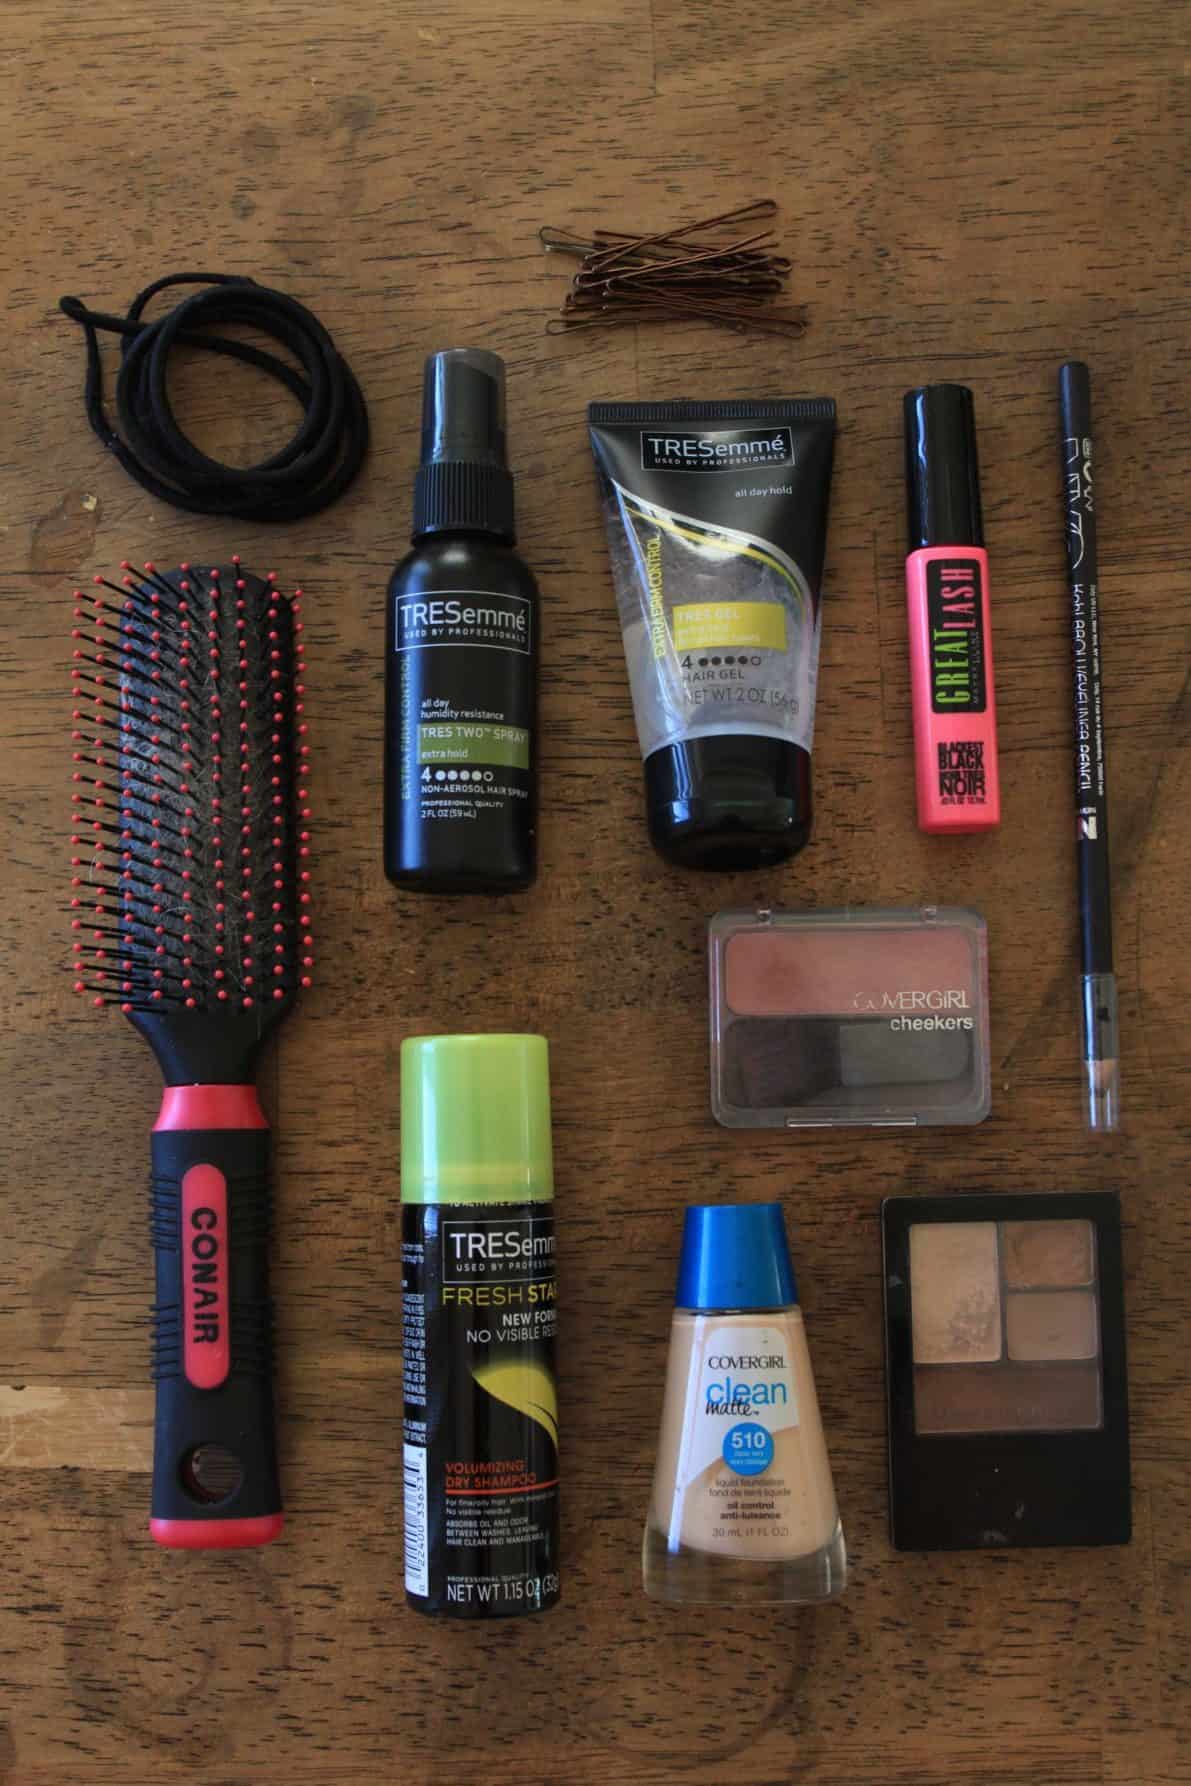 Beauty products